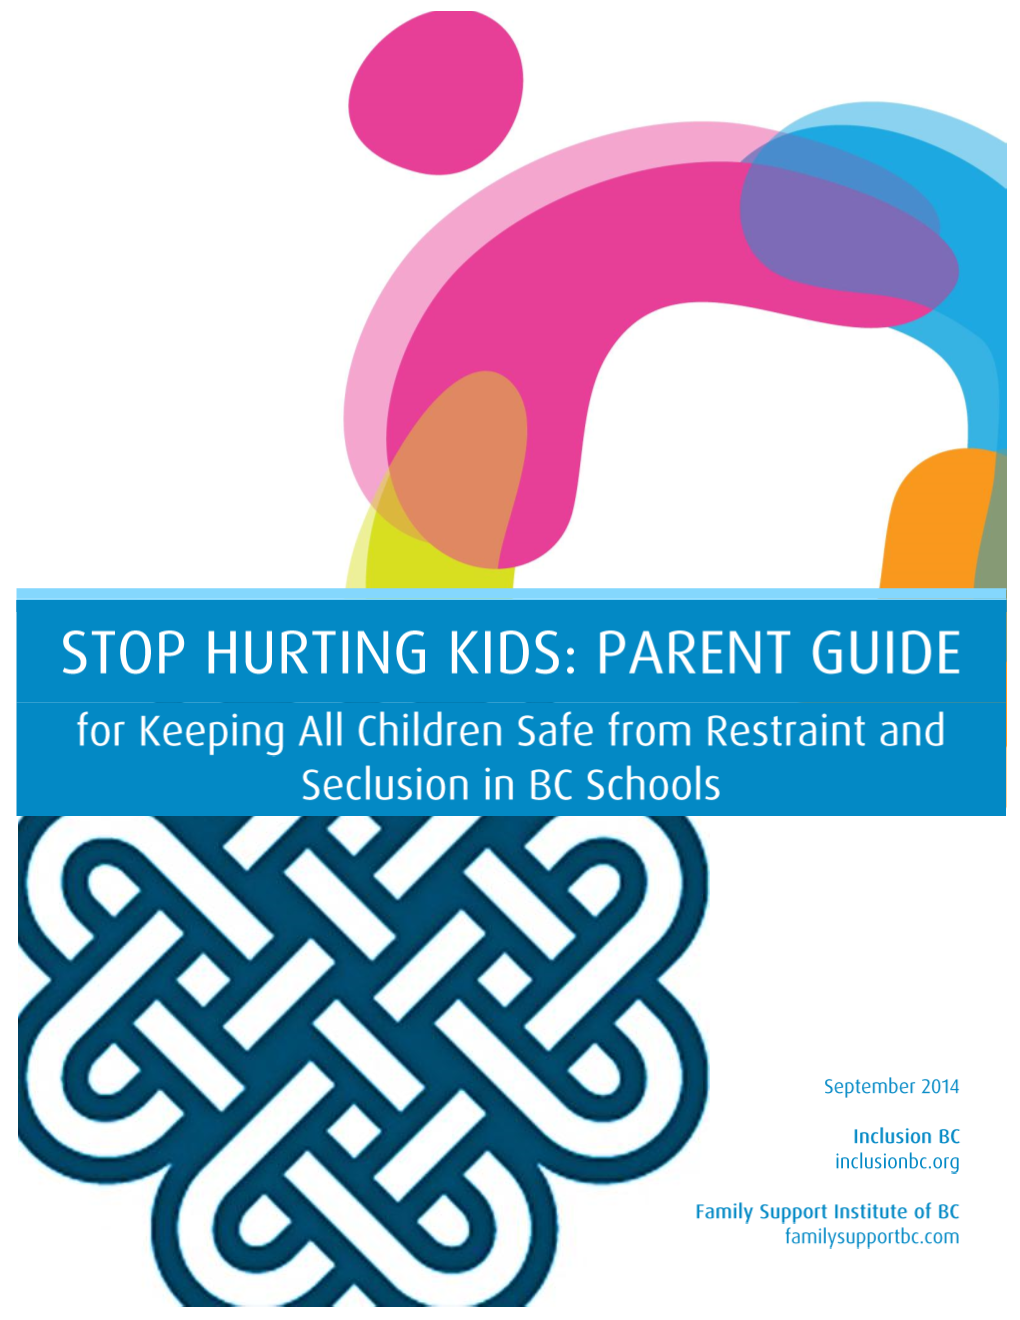 Stop Hurting Kids: Parent Guide for Keeping All Children Safe from Restraint and Seclusion in BC